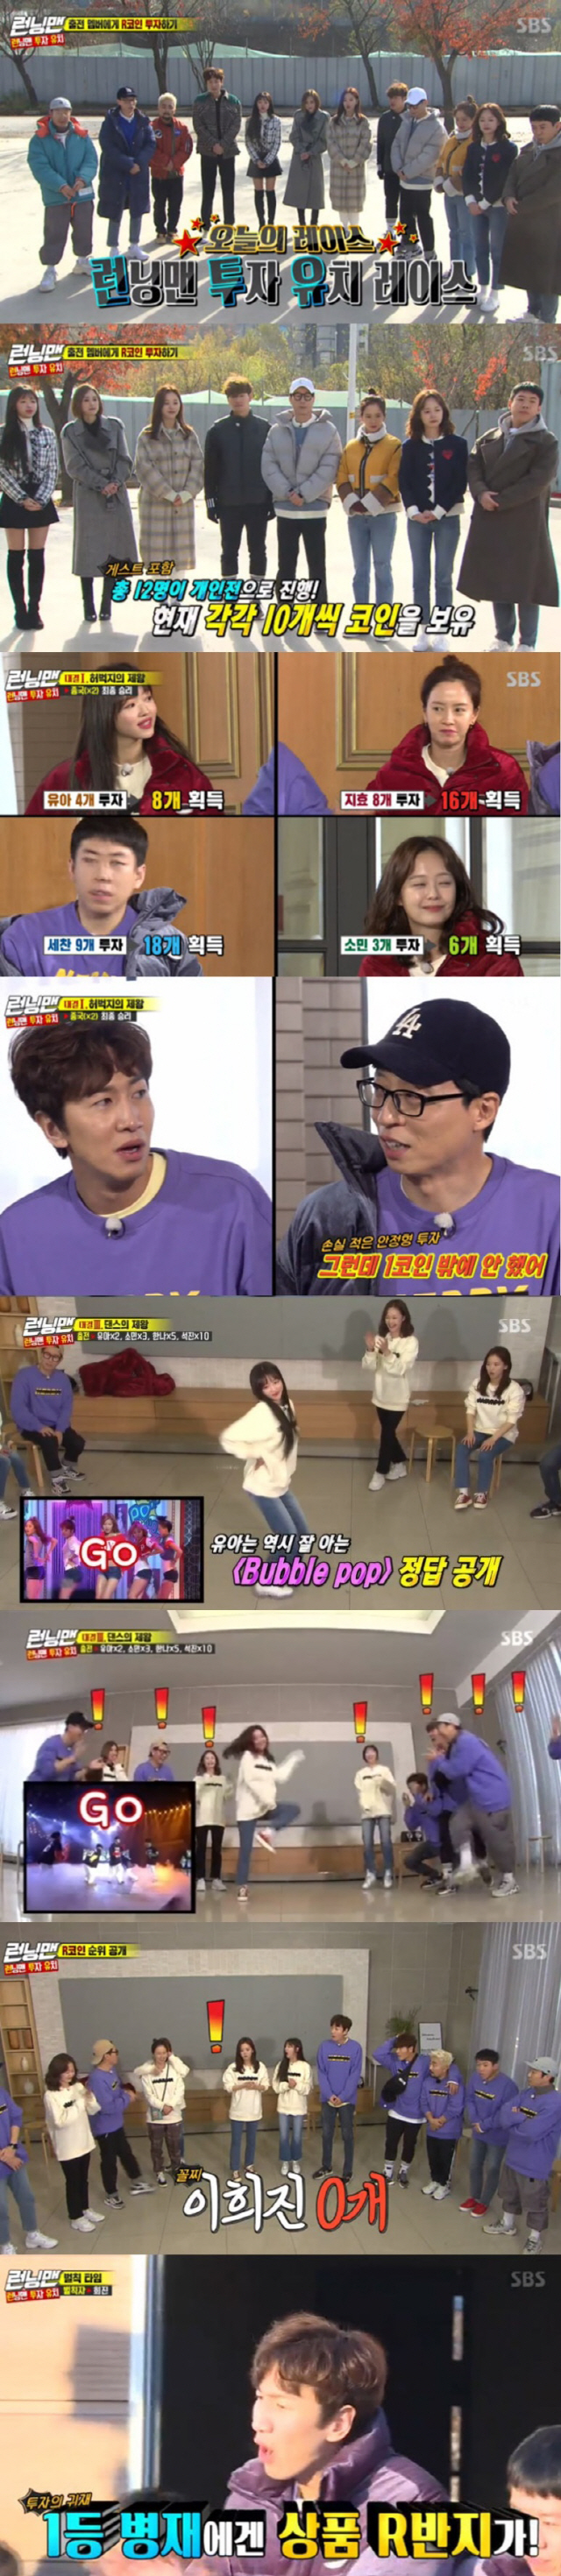 SBS Running Man kept the top 2049 target TV viewer ratings.The broadcast was held as Running Man Investment Attraction Race, with actors Kang Han-na, Lee Hee-Jin, YooAA of Oh My Girl and broadcaster Yoo Byung-jae as guests.Members can invest RCOIN in each round to call their assets, and the person with the least RCOIN will be punished.The first confrontation was the Lord of the thighs as a pain-bearing confrontation.With Kim Jong-kook winning as everyone expected, Lee Kwang-soo was hit in the thigh by Kim Jong-kook and pulled out painfully to laugh.Song Ji-hyo, Jeon So-min, Yang Se-chan and YooAA, who invested in Kim Jong-kook, were called RCOIN.In the second showdown quiz, The King of Quiz, Haha, Lee Kwang-soo, and Yoo Byung-jae, who invested in him as Brain YooA Jae-Suk won the championship, earned twice as much COIN.In the third showdown, The King of Dance, the Dance Shin Dance King YooAAs big success attracted attention and won first place, and investors YooA Jae-Suk, Kim Jong-kook and Yoo Byung-jae also succeeded in being called COIN.In particular, Yoo Byung-jae won the final prize with a lot of COIN in the final match, and Lee Hee-Jin won the Water bomb penalty with 0 COIN.The scene was the best TV viewer rating per minute at 7.9%.